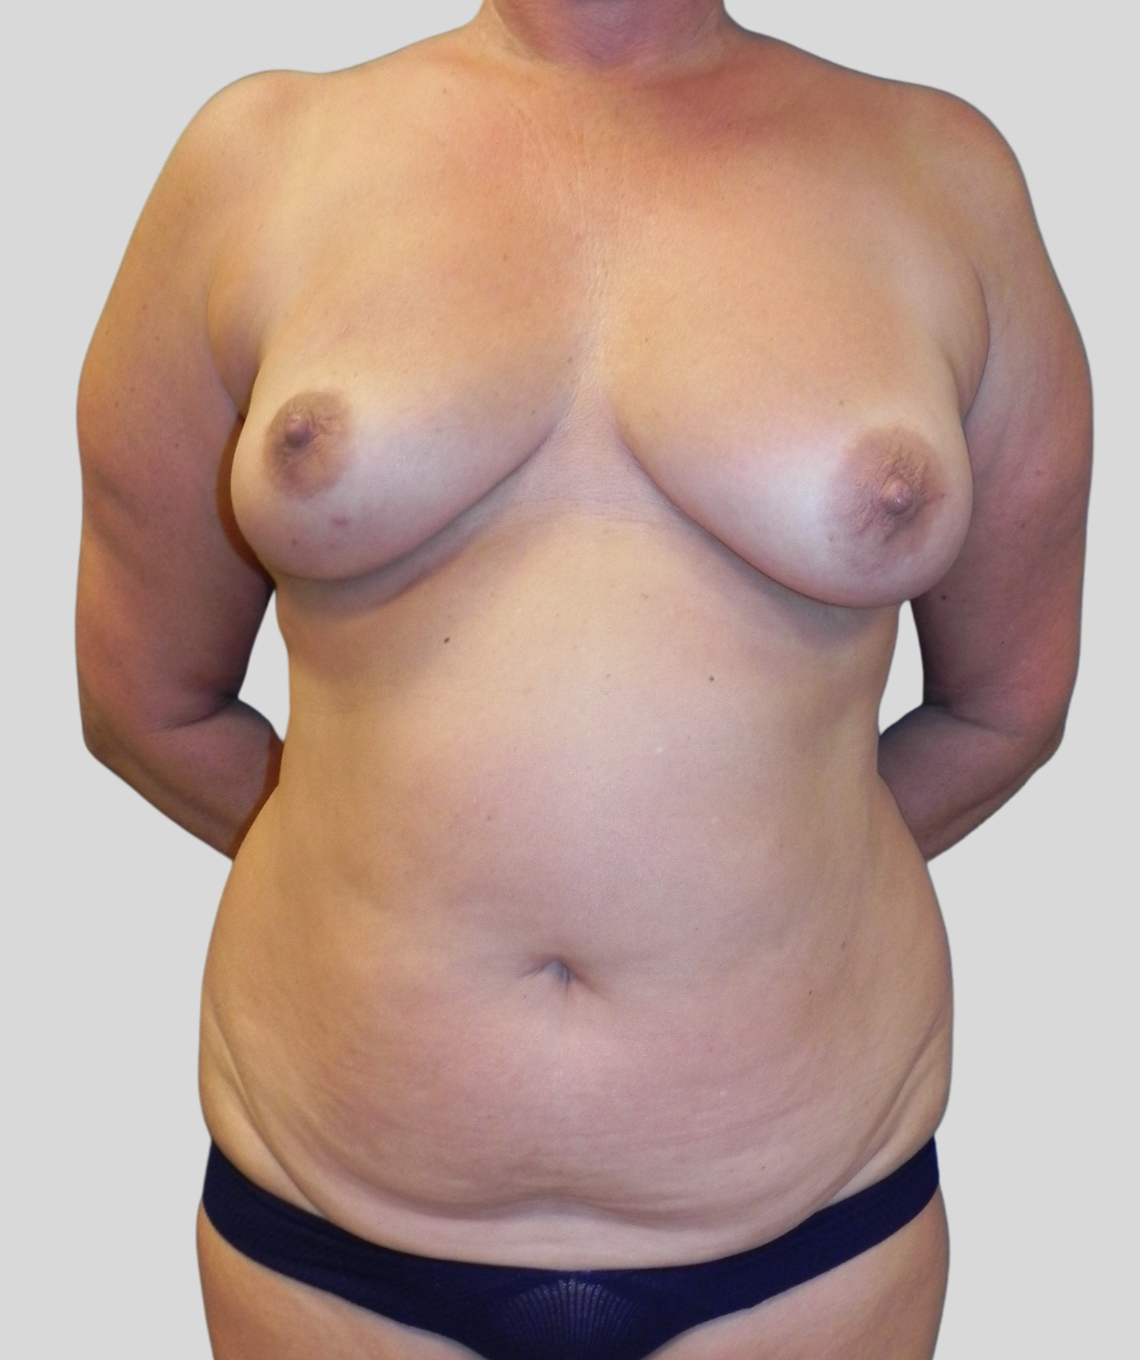 diep flap- before and after photos - before - prma plastic surgery - case 11